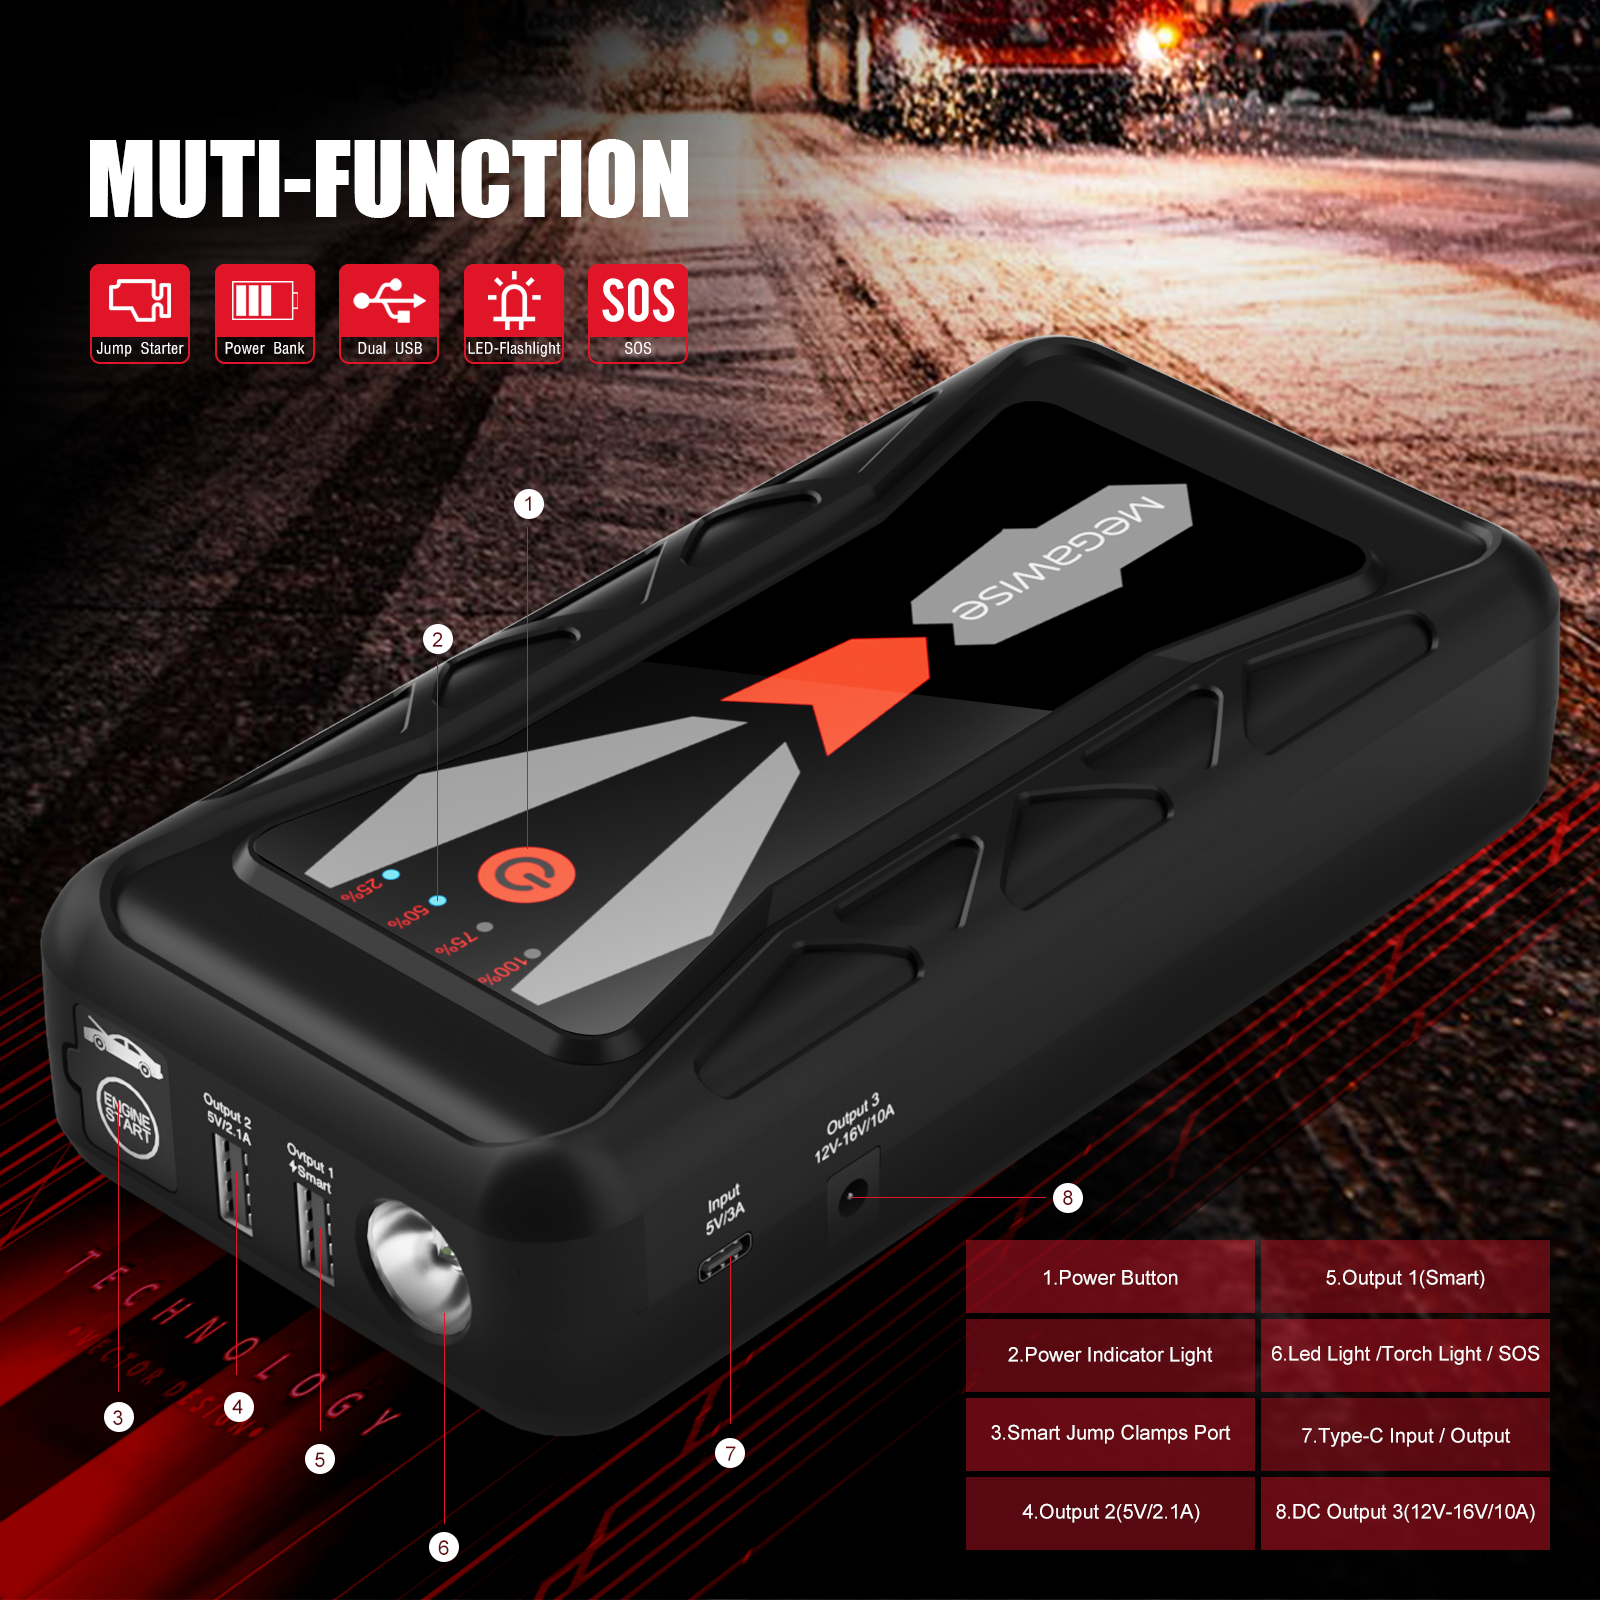 MEGAWISE 2500A Peak 21800mAh Car Battery Jump Starter (up to 8.0L Gas/ –  Megawise